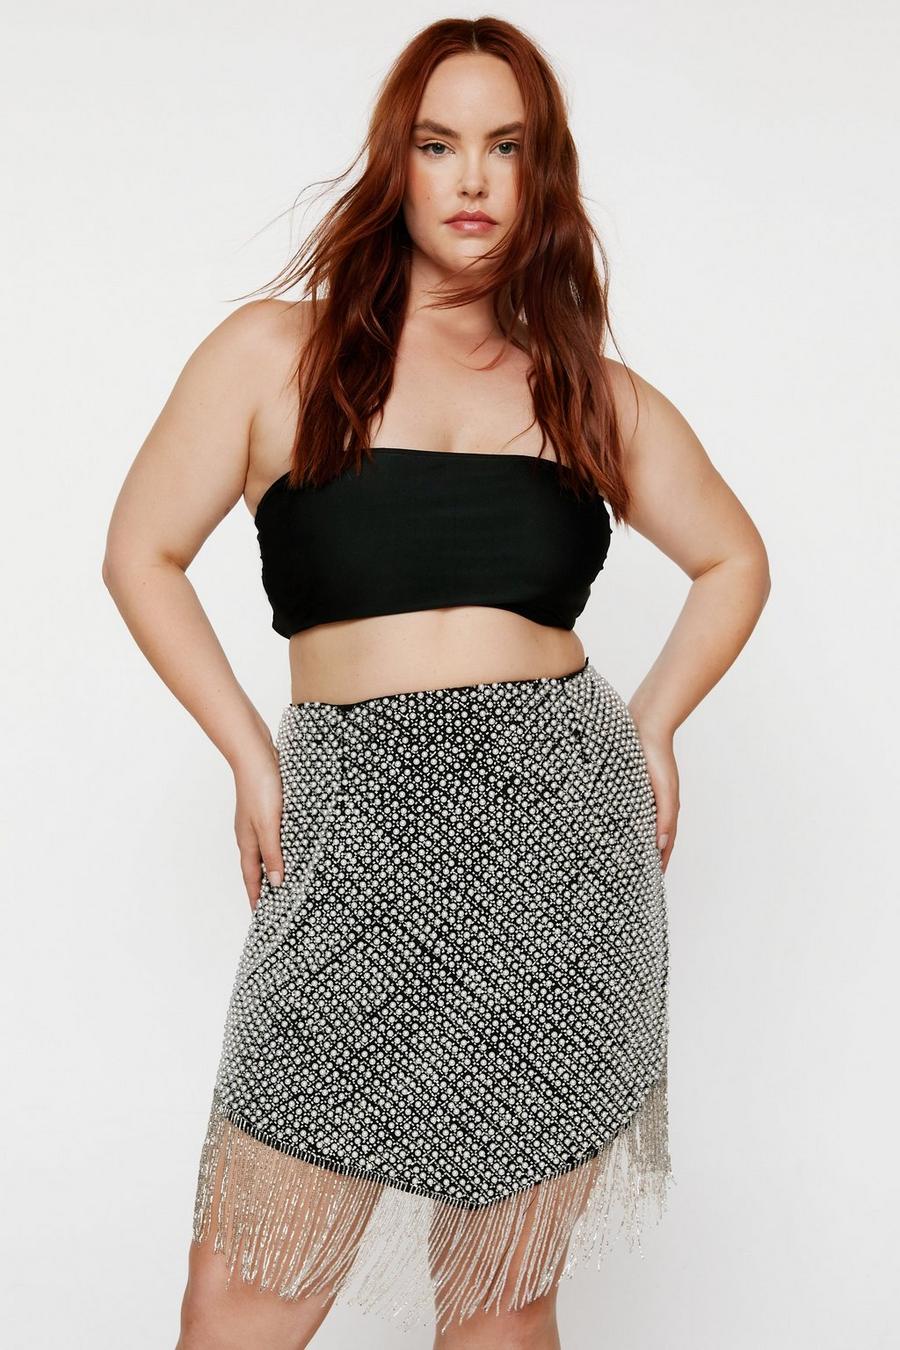 Plus-Size Summer Outfits